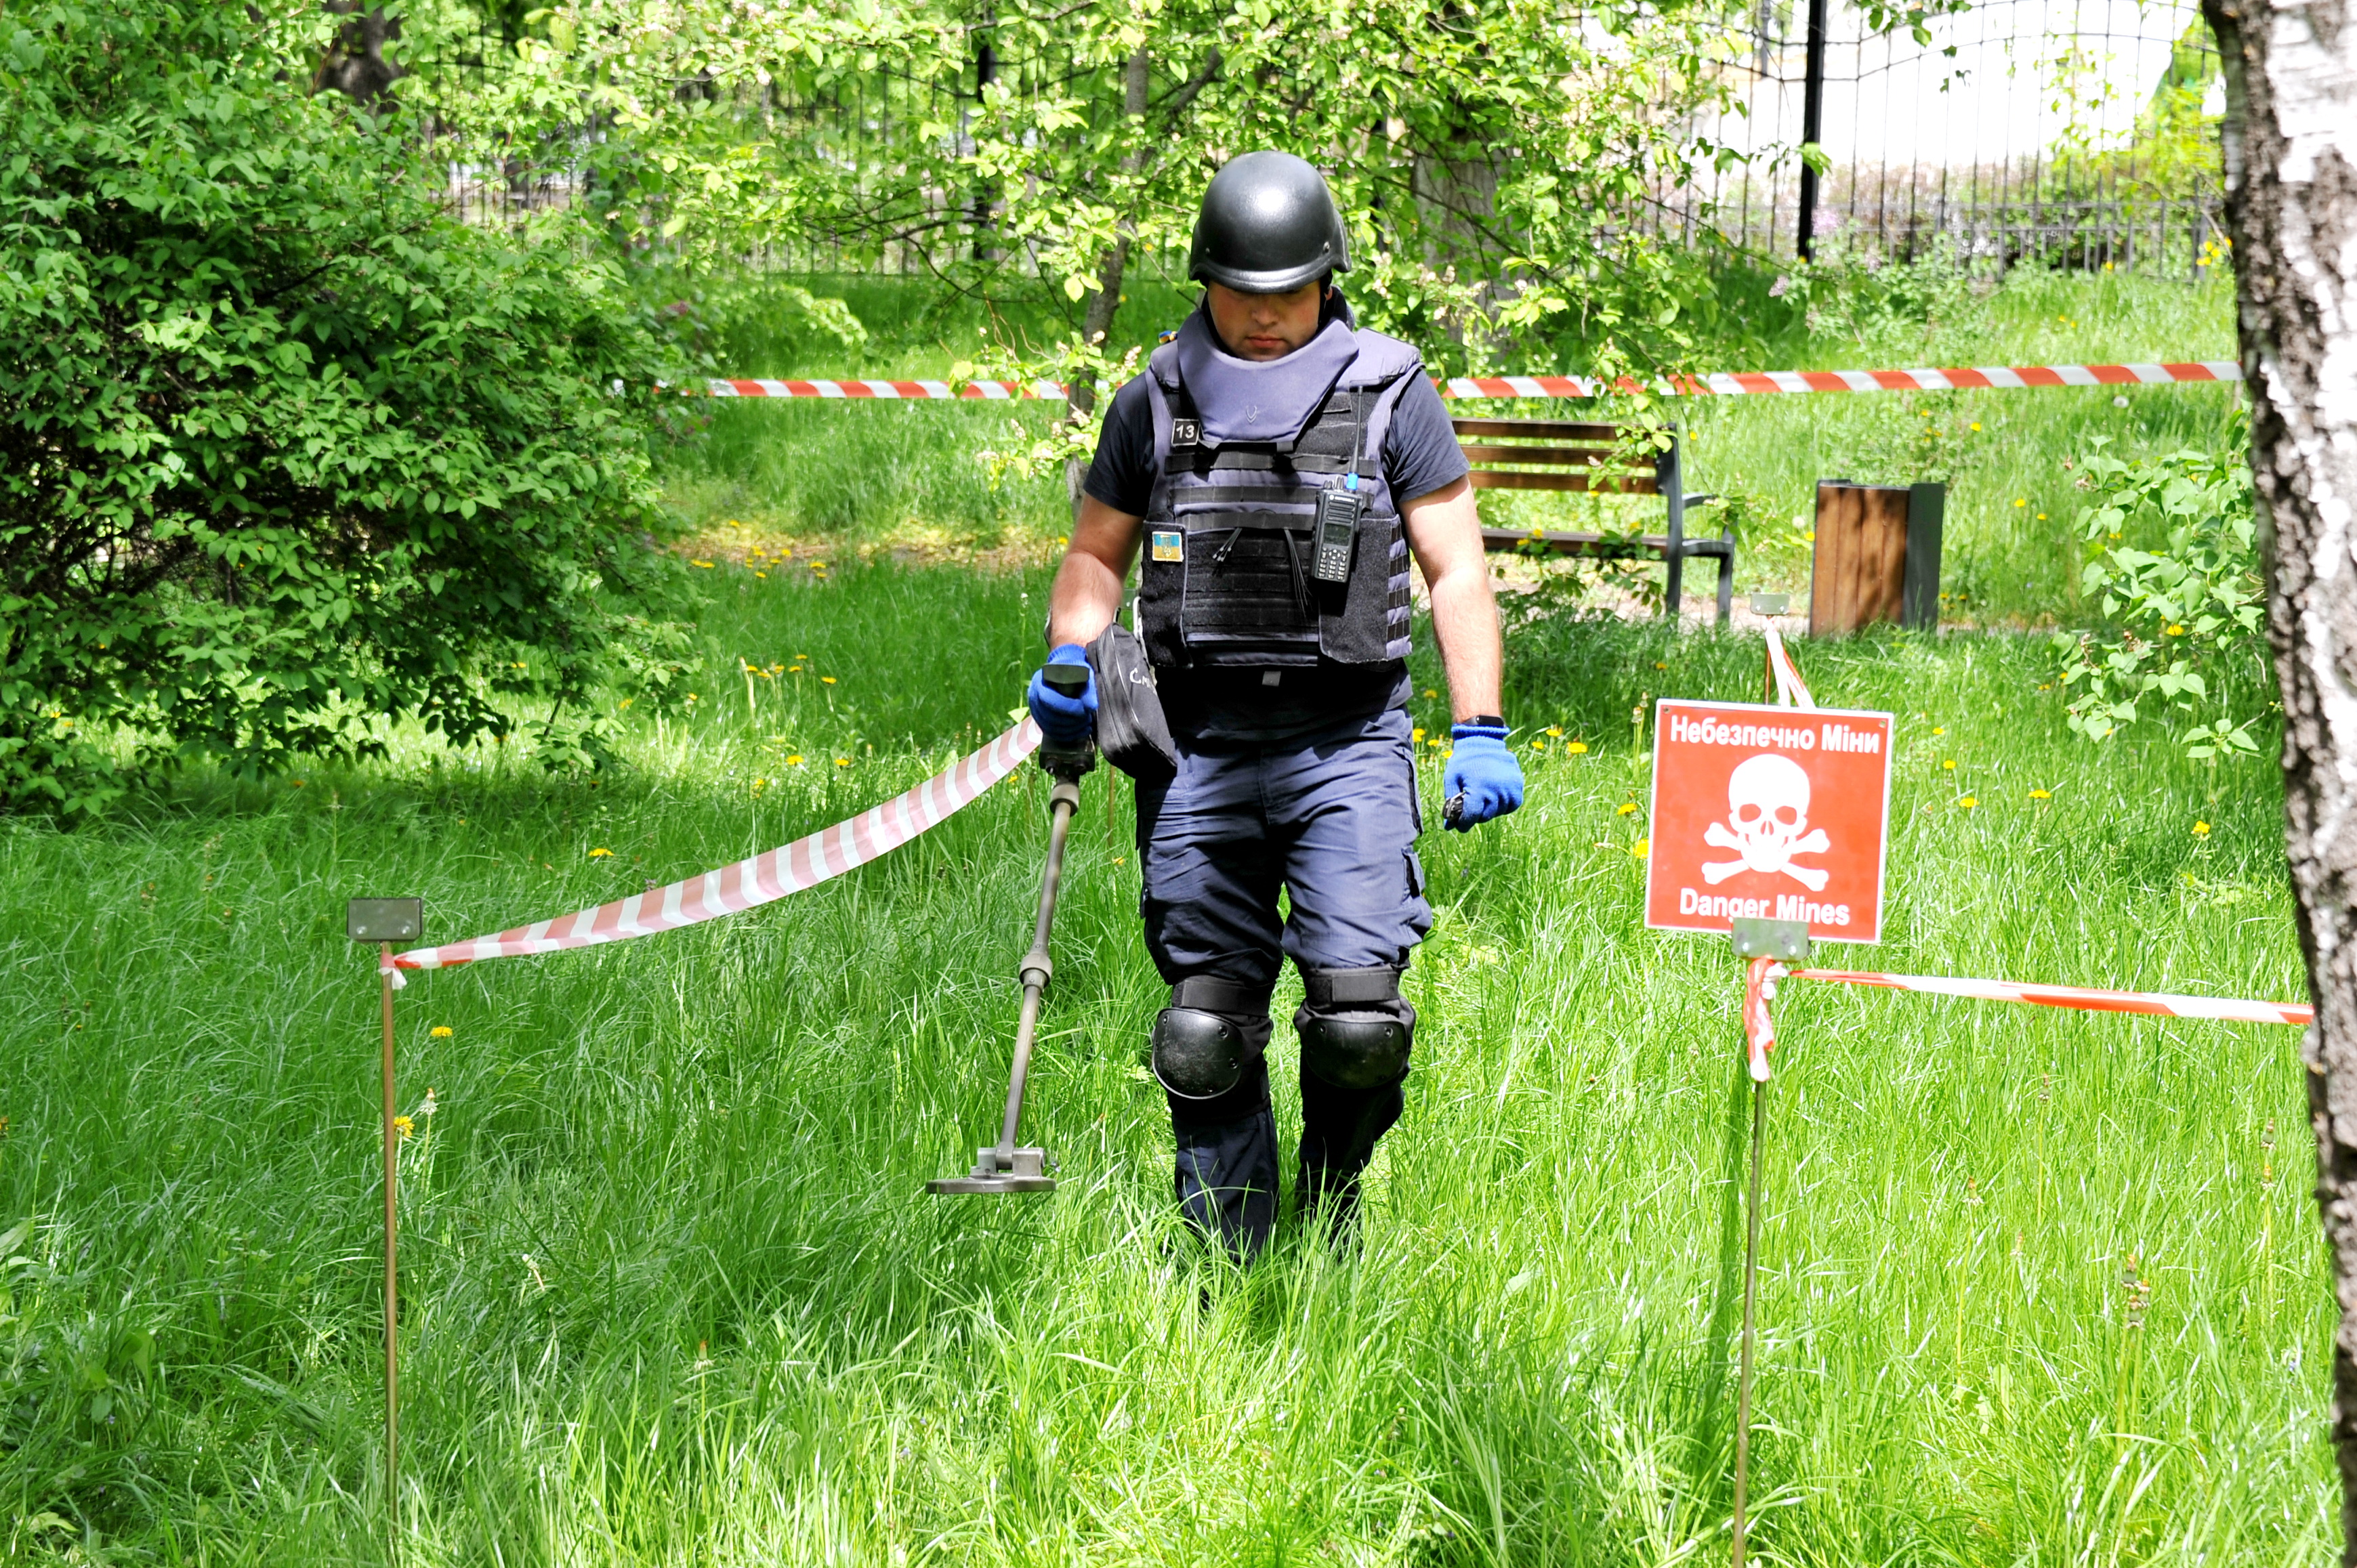 An employee of the State Emergency Service of Ukraine sweeps an area of ground for unexploded ordnance and landmines. Photo credit – Oleksandr Simonenko / UNDP Ukraine.